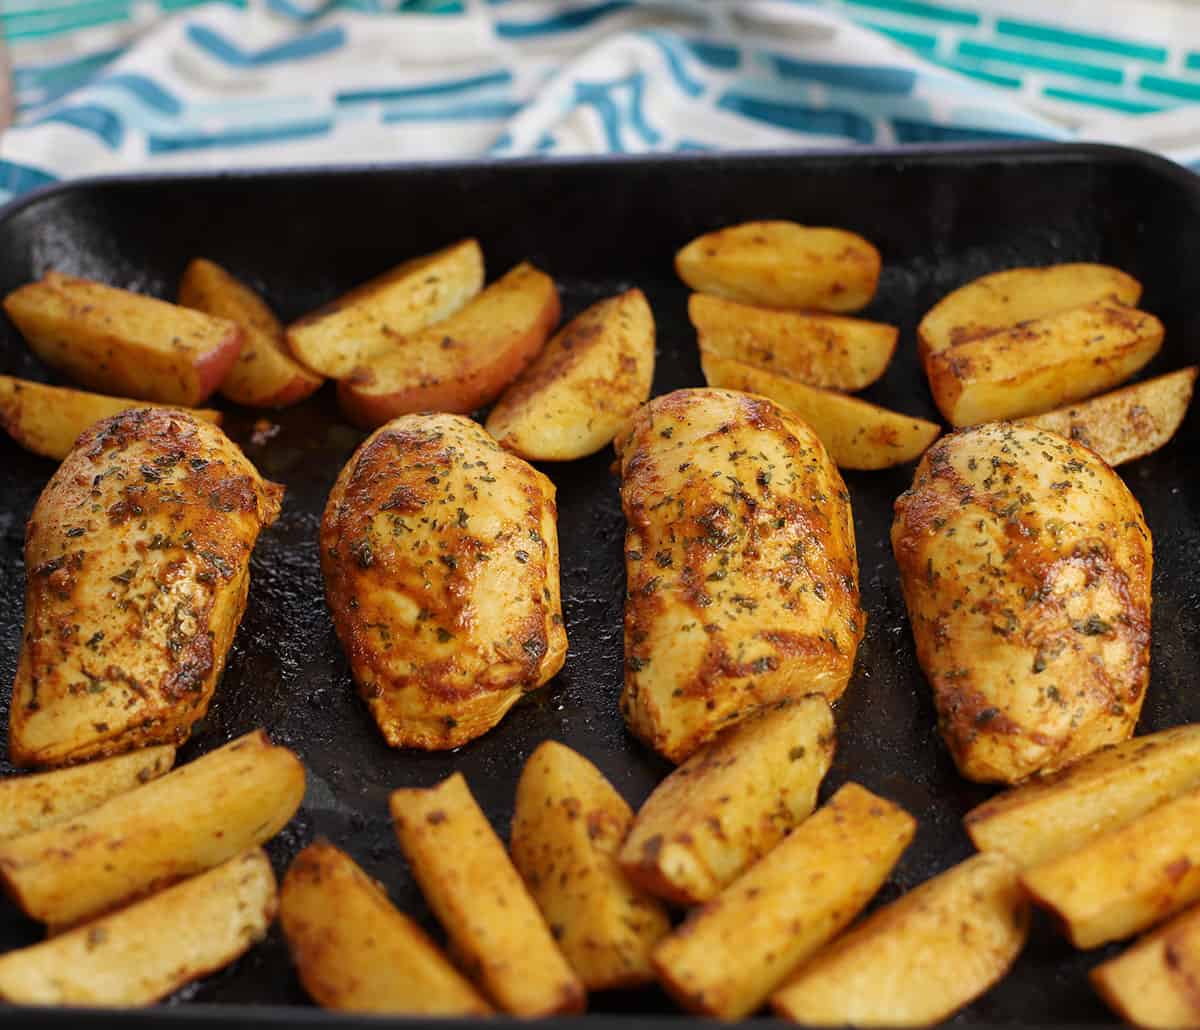 Baked chicken breasts and potatoes on sheet pan.